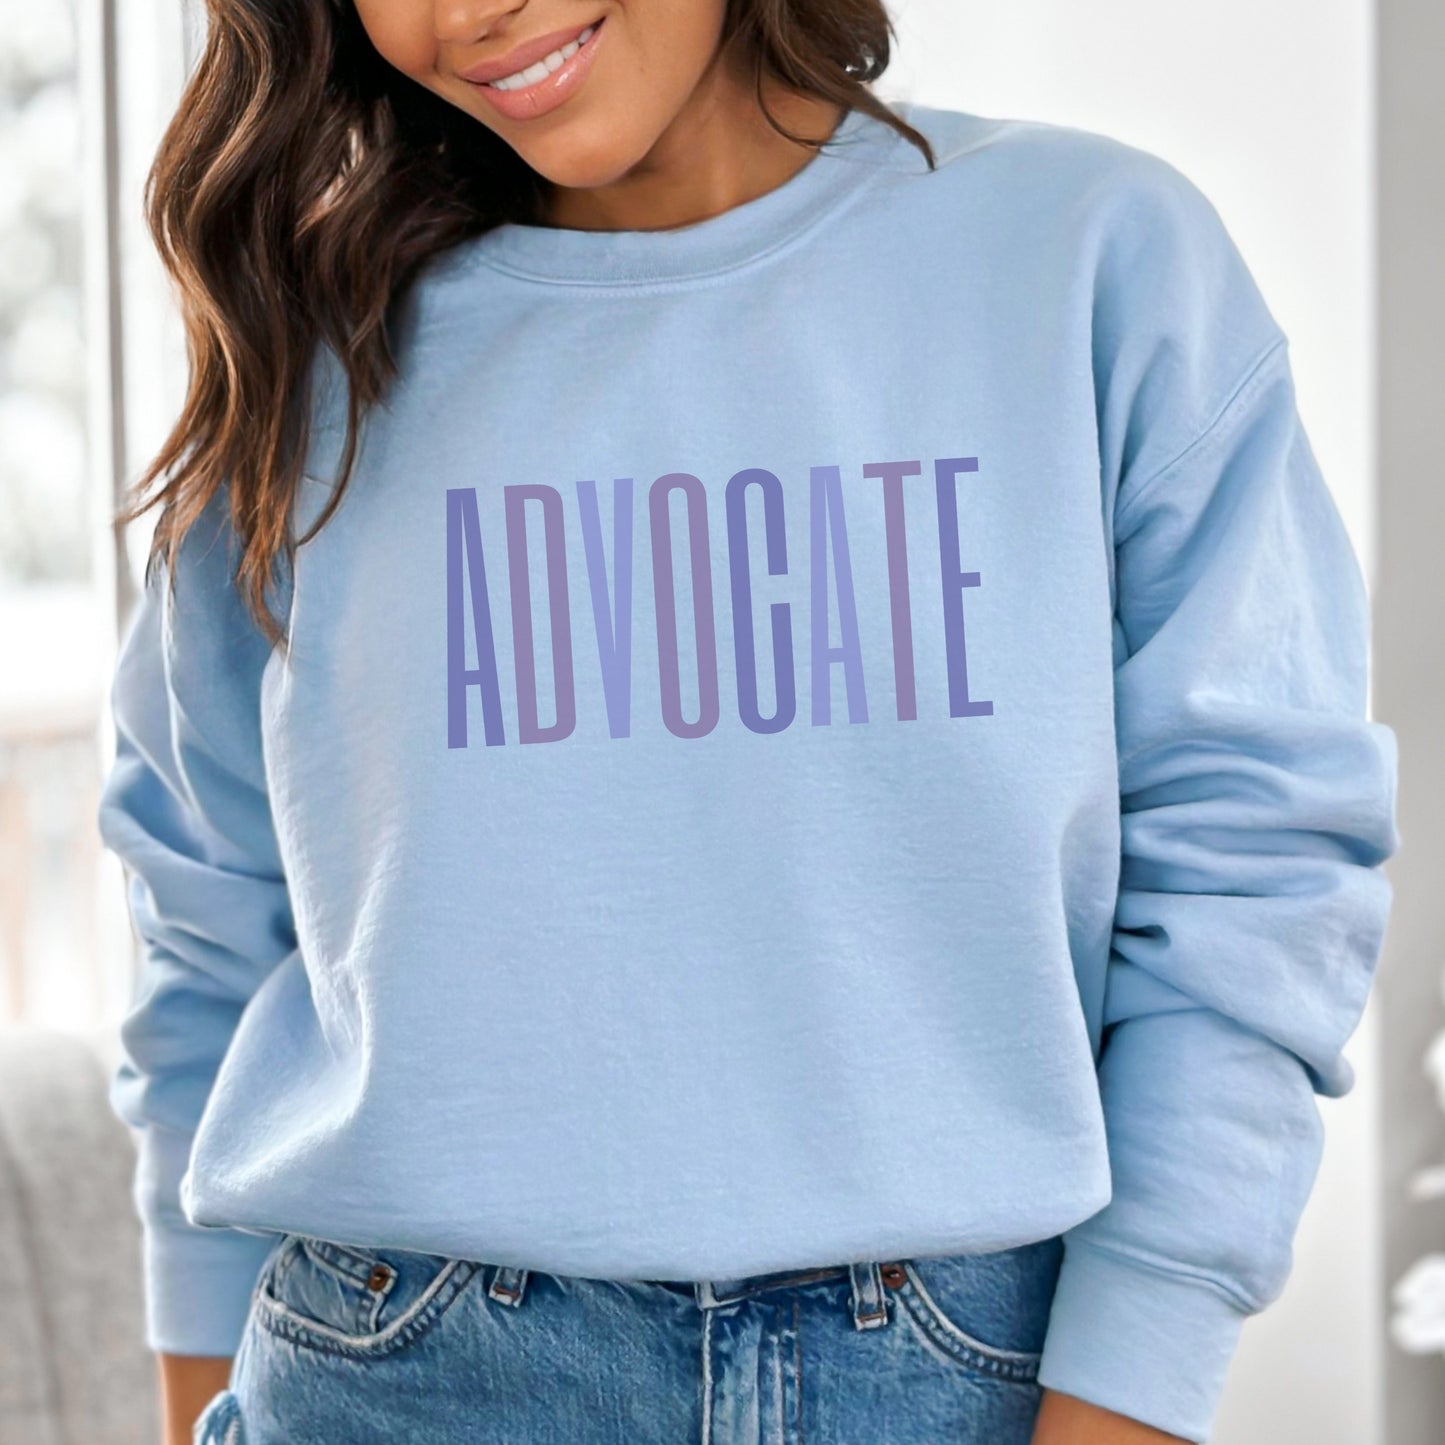 Crewneck sweatshirt with a powerful "ADVOCATE" wordmark emblazoned across the chest in varying shades of purple, symbolizing the strength and unity of domestic violence advocates. The gradient effect from deep violet to lavender adds an eye-catching touch, making this sweater a visually compelling tribute to your commitment to ending domestic abuse.